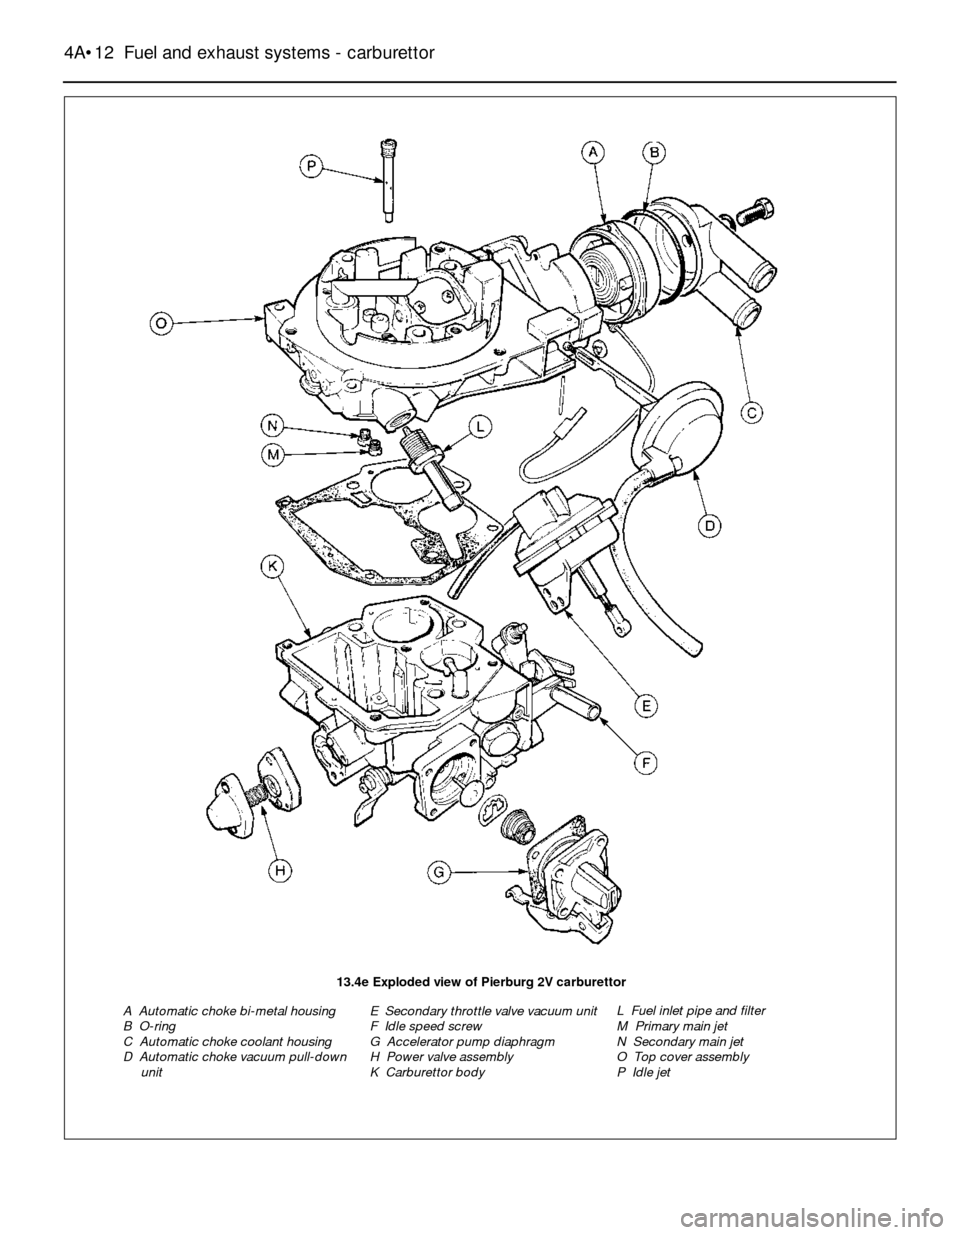 FORD SIERRA 1982 1.G Fuel And Exhaust Systems Carburettor User Guide 4A•12Fuel and exhaust systems - carburettor
13.4e Exploded view of Pierburg 2V carburettor
A  Automatic choke bi-metal housing
B  O-ring
C  Automatic choke coolant housing
D  Automatic choke vacuum 